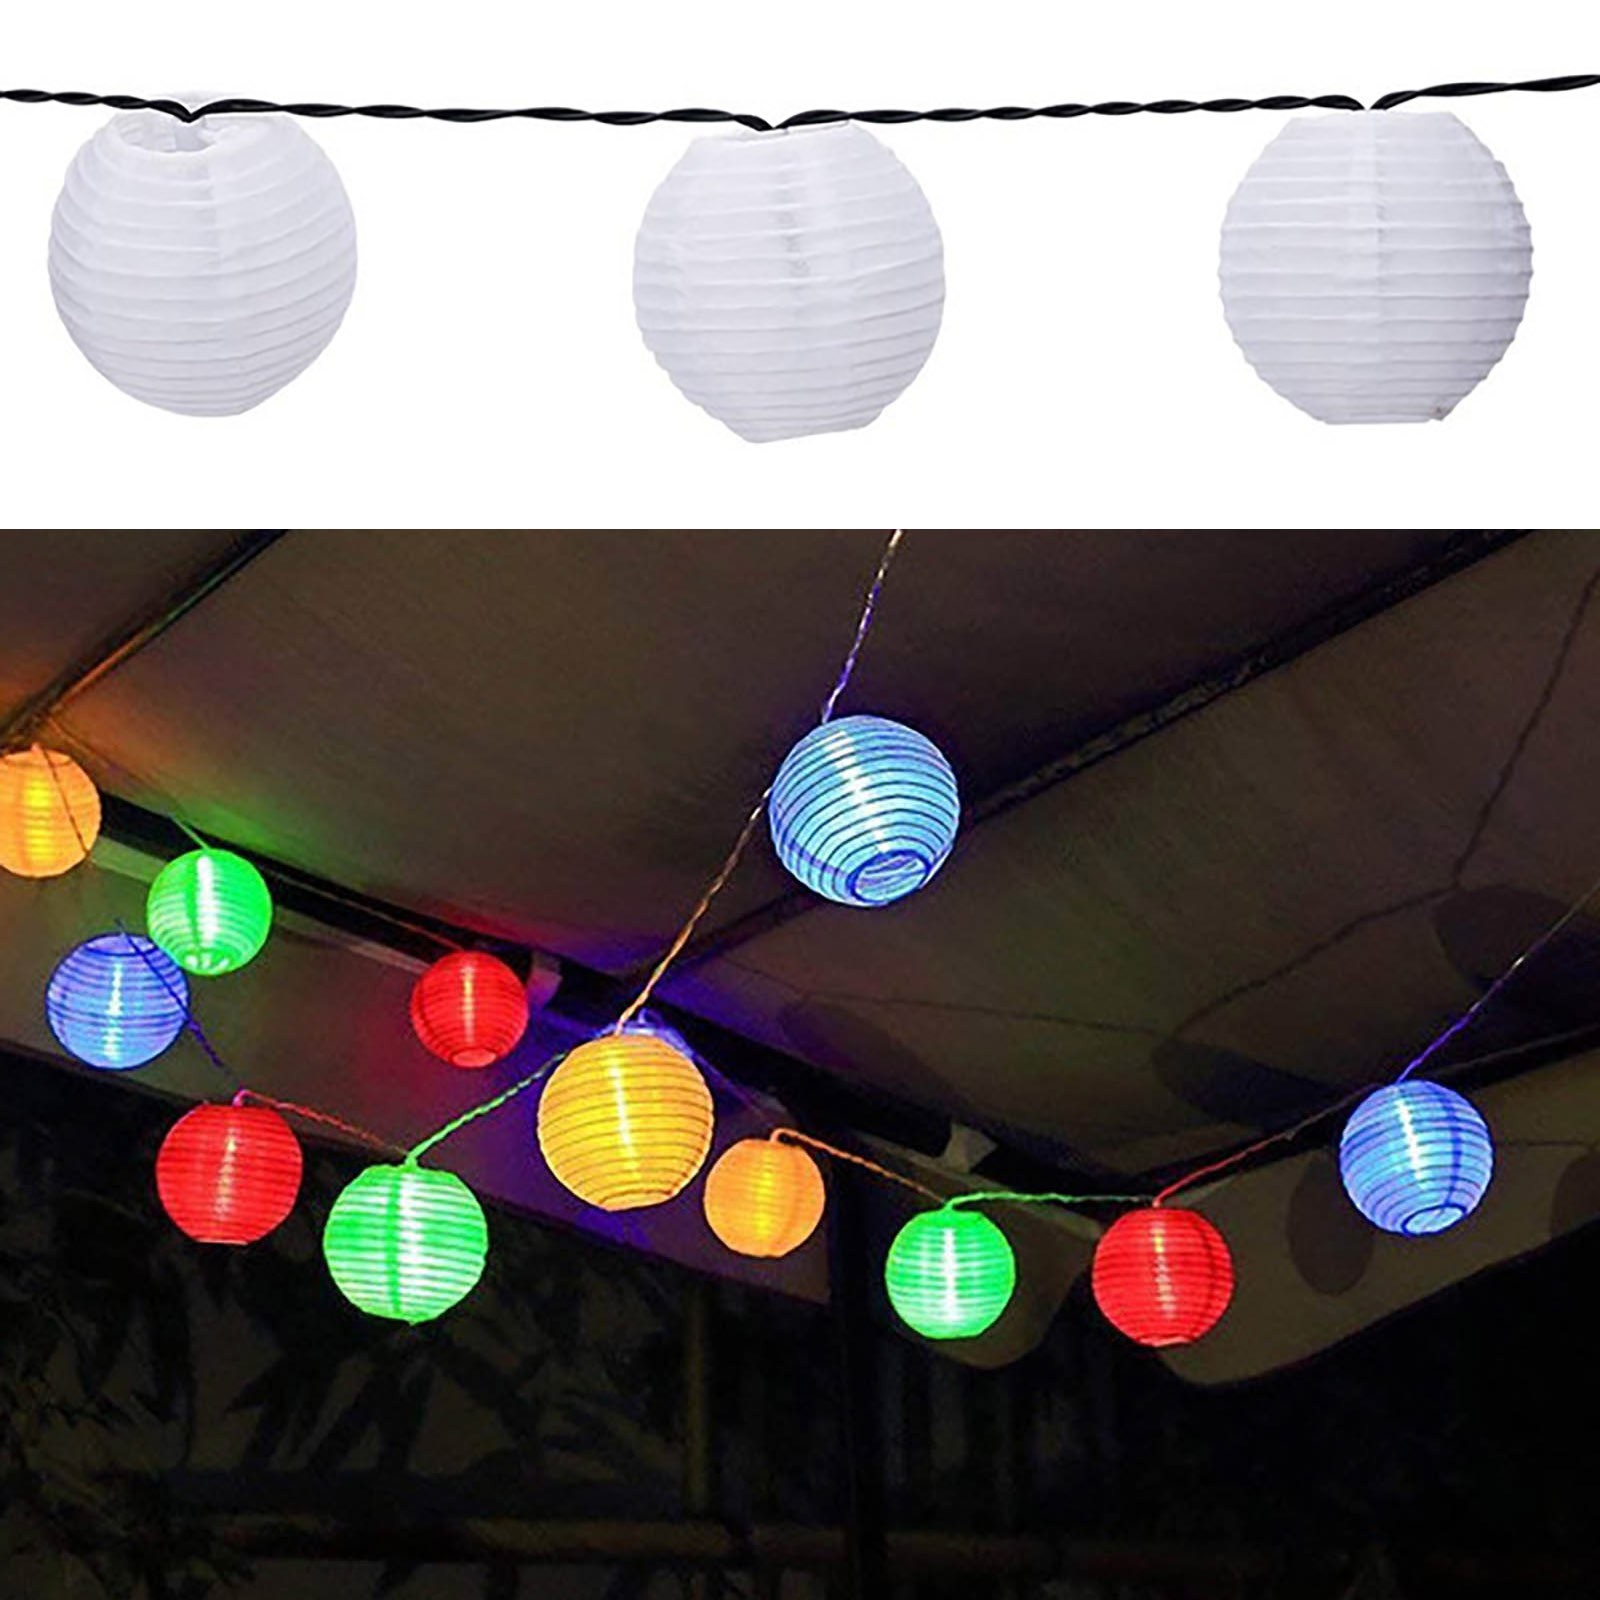 Led Dome Christmas Lights Solar Garden Lamp Waterproof 10 Outdoor Solar String Lights For Garden Outdoor Wedding Party 20led Warm Lights Wire - image 5 of 9